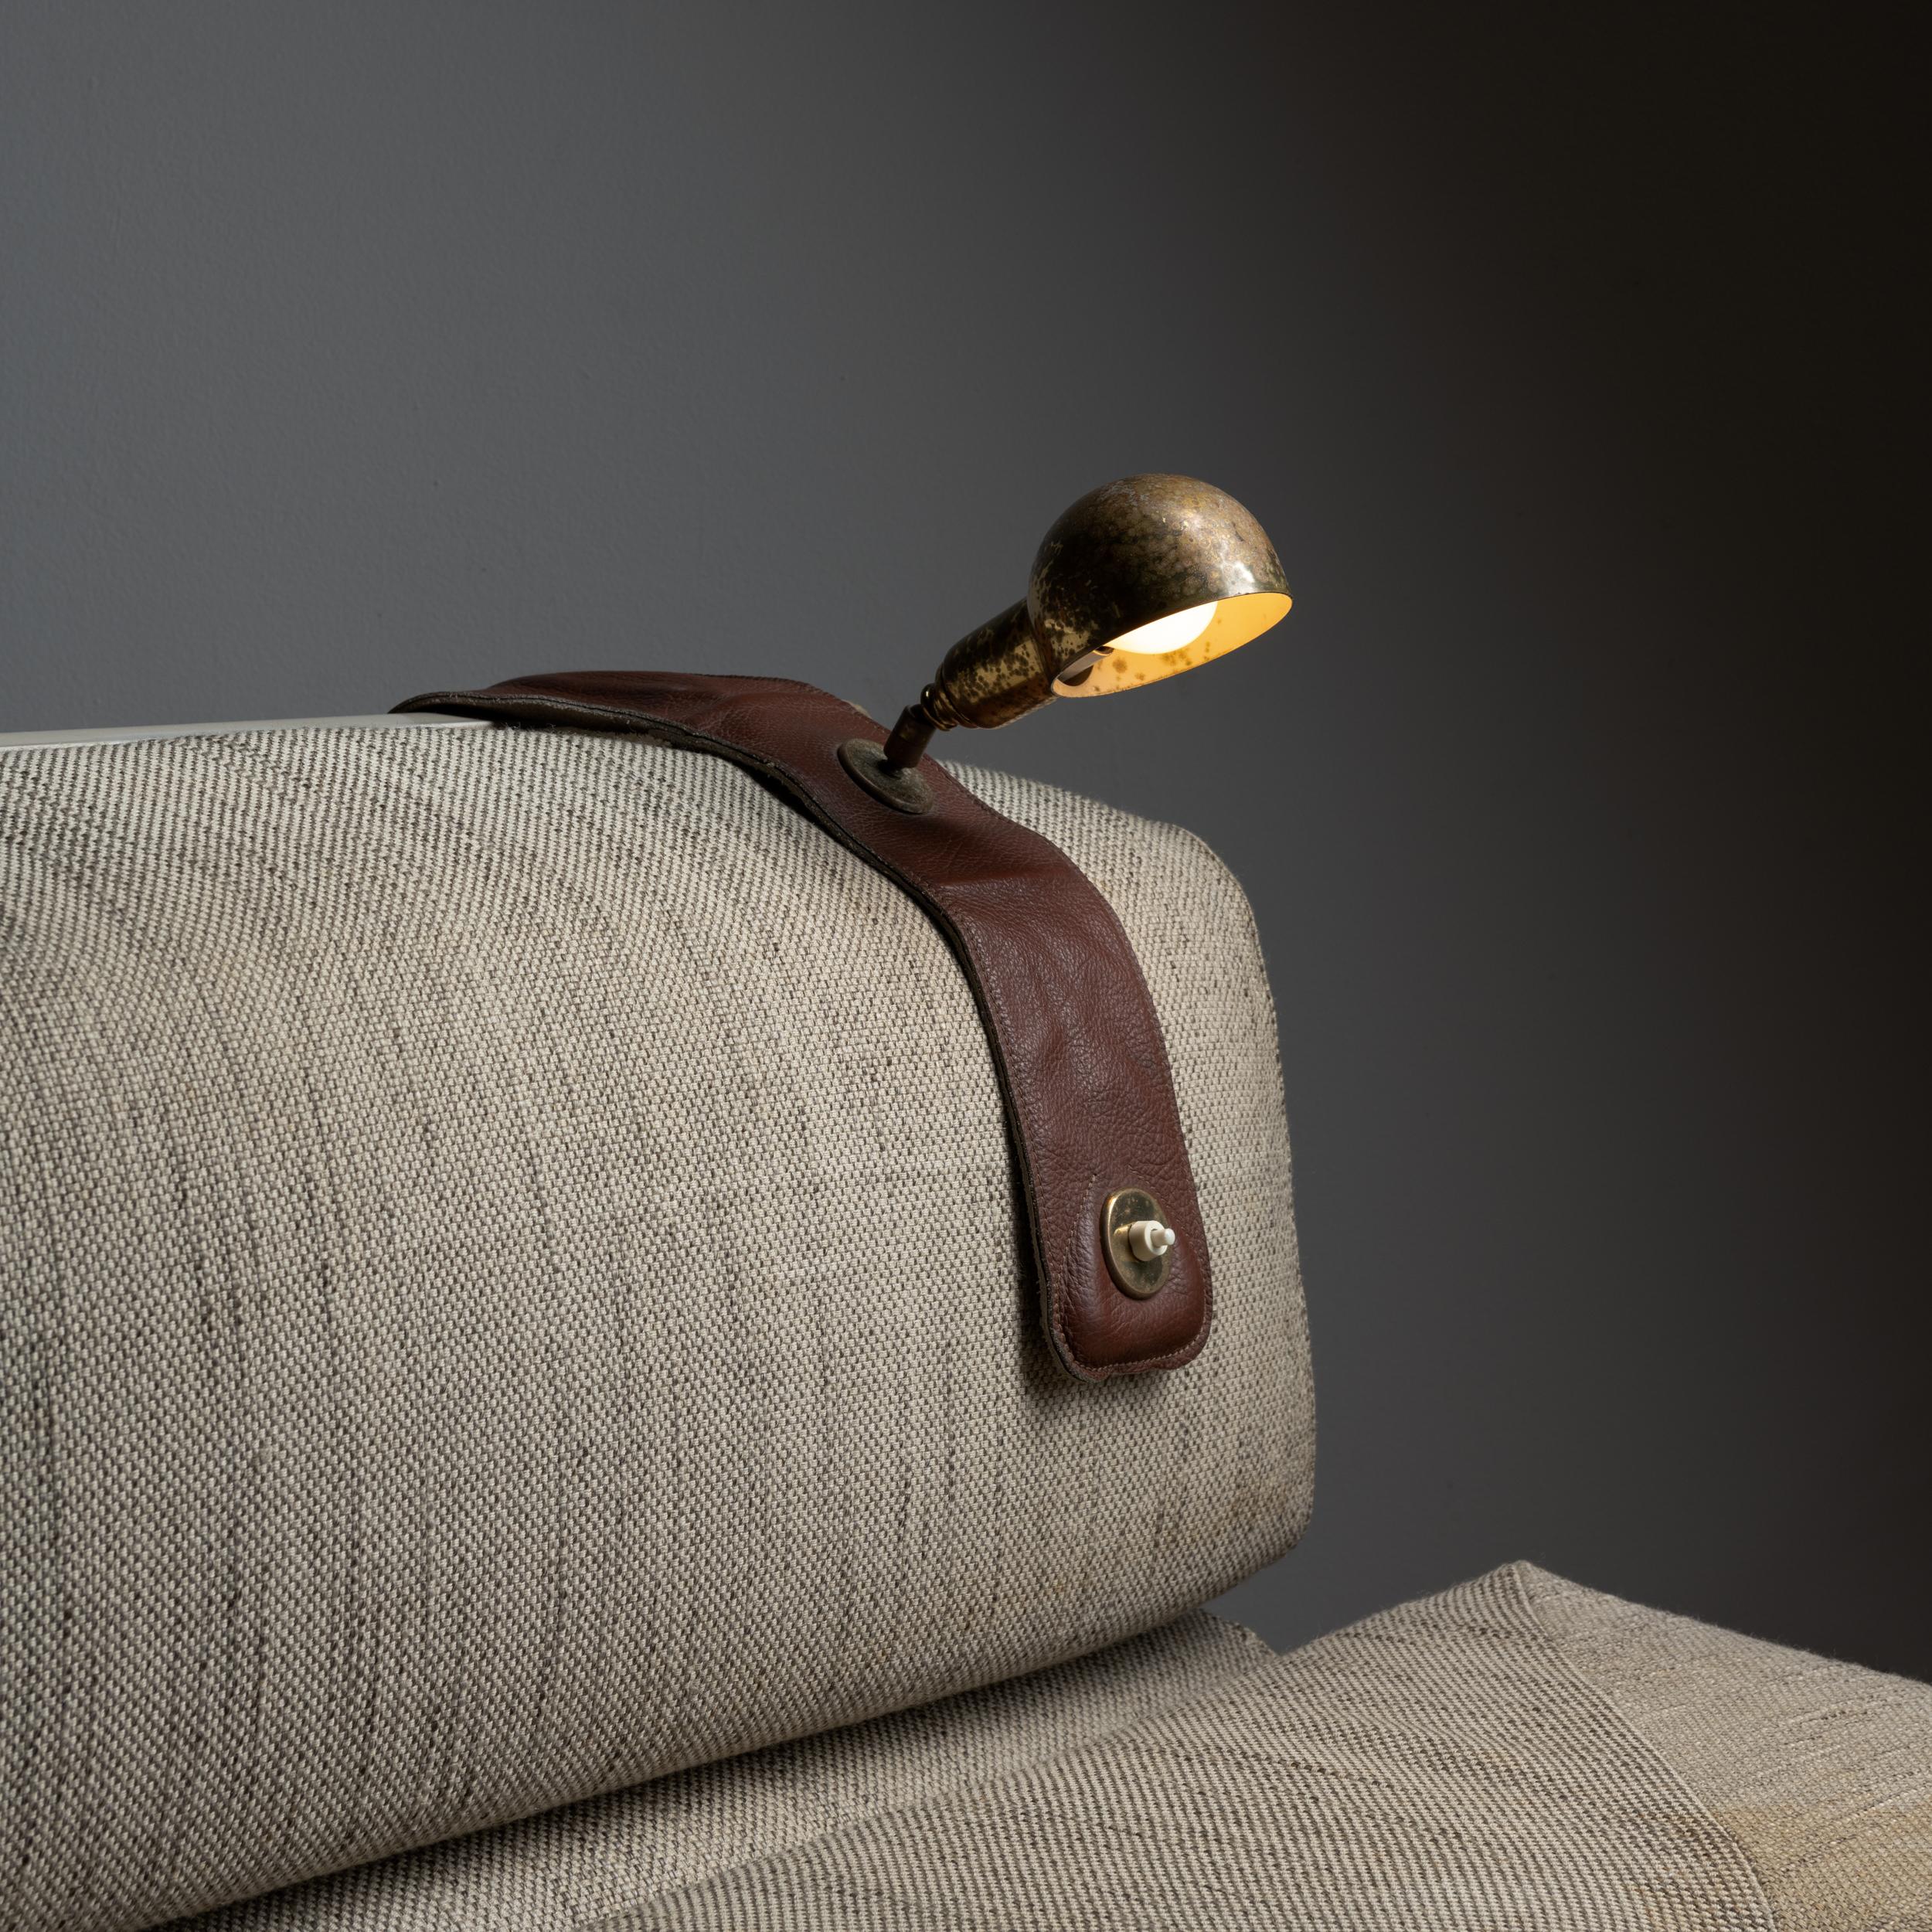 Model Lp01 armchair lamp by Luigi Caccia Dominioni for Azucena. Designed and manufactured in Italy, circa 1970s. Leather and brass. Brass shade adjust to various positions. We recommend one E27 40w maximum bulb. Bulb provided as a one time courtesy.